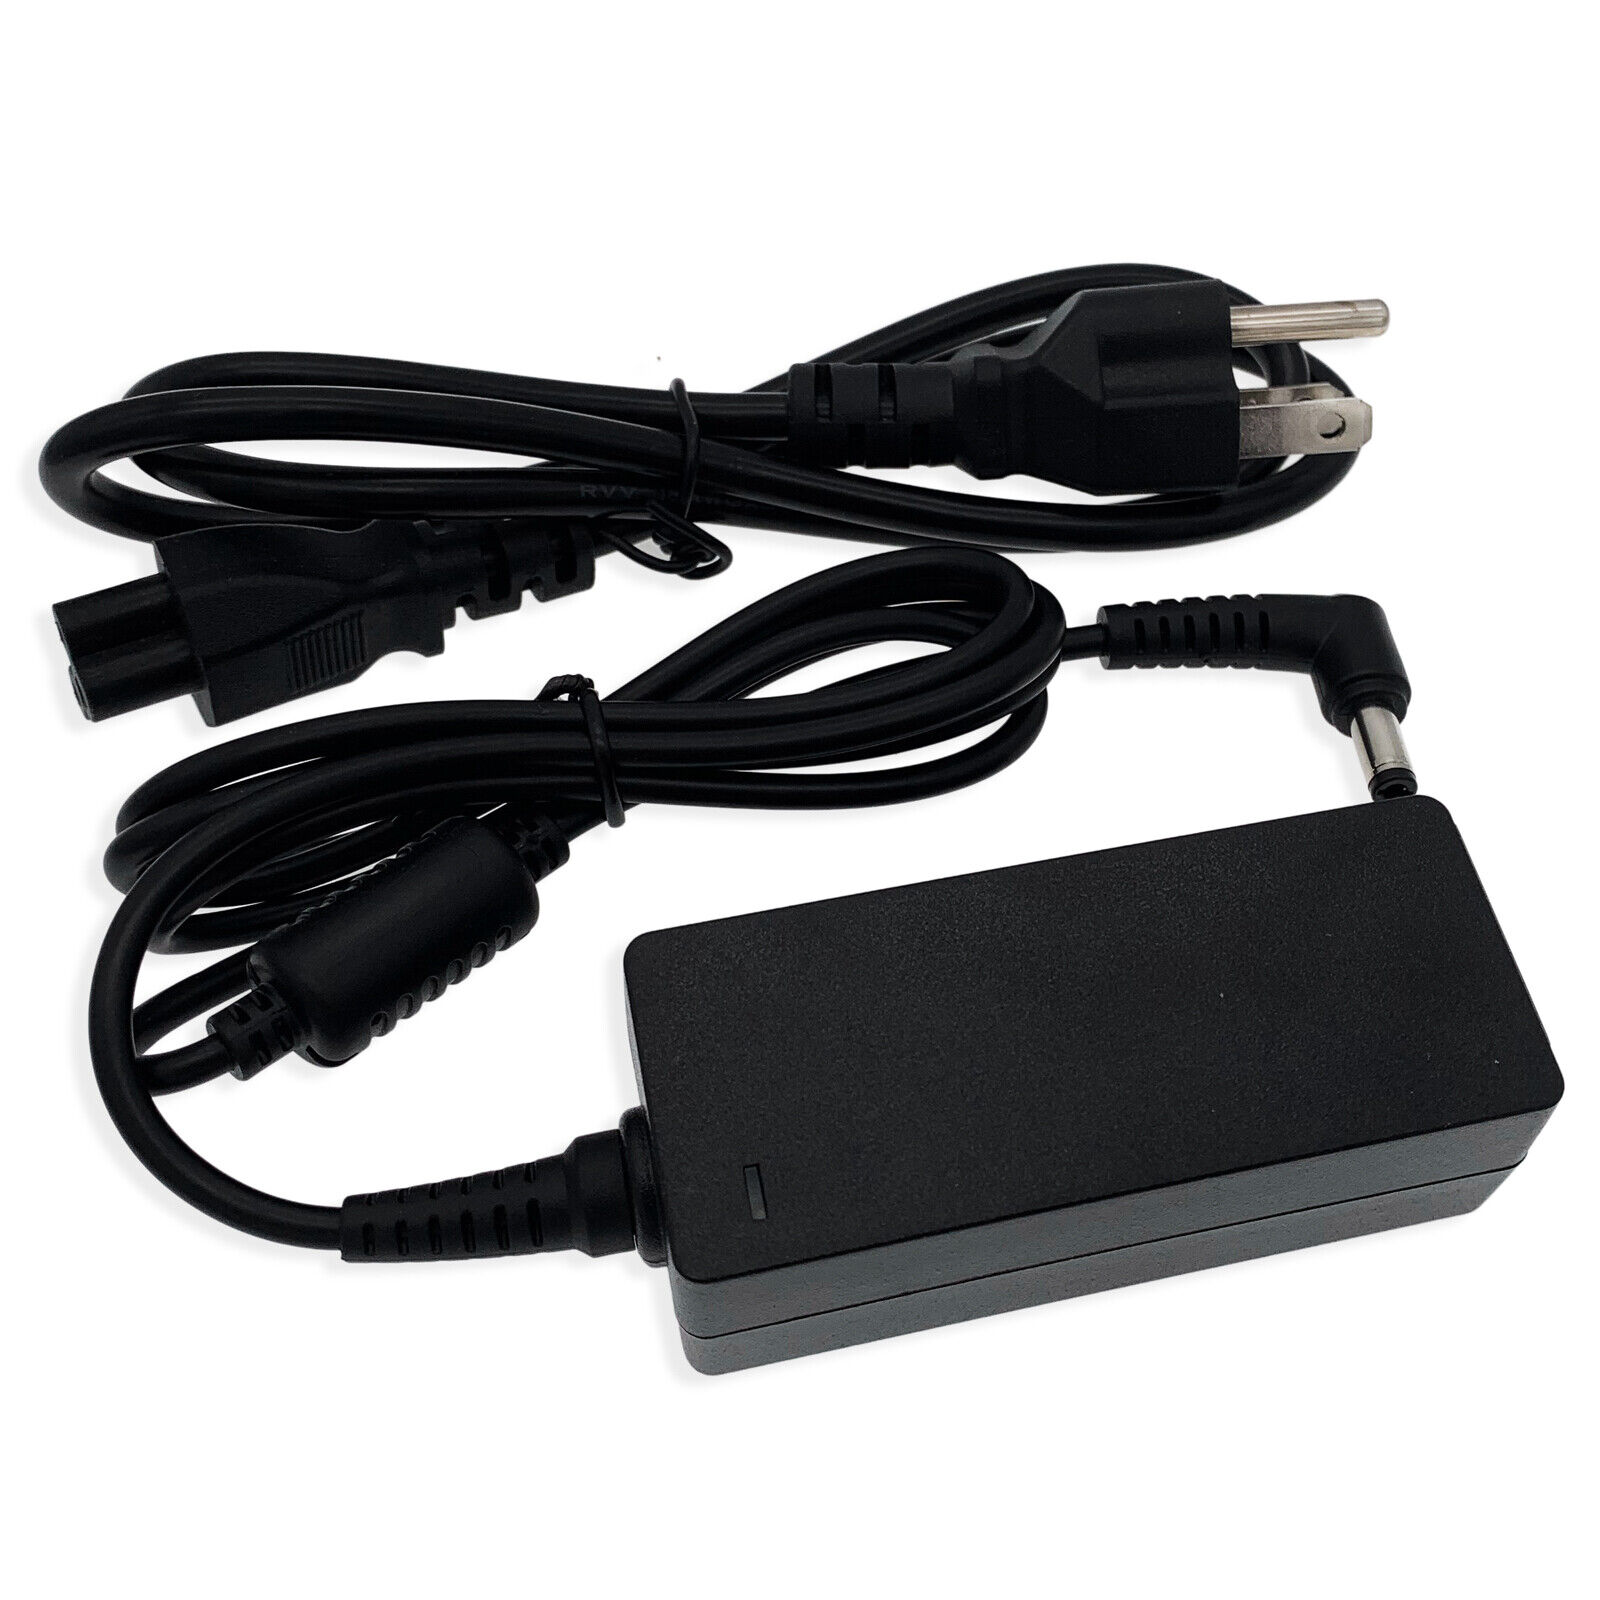 19V 3.42A AC ADAPTER dc CHARGER FOR ITRONIX GoBook II GoBook III 65W POWER SUPPLY CORD Bundled Items Power Cable Color